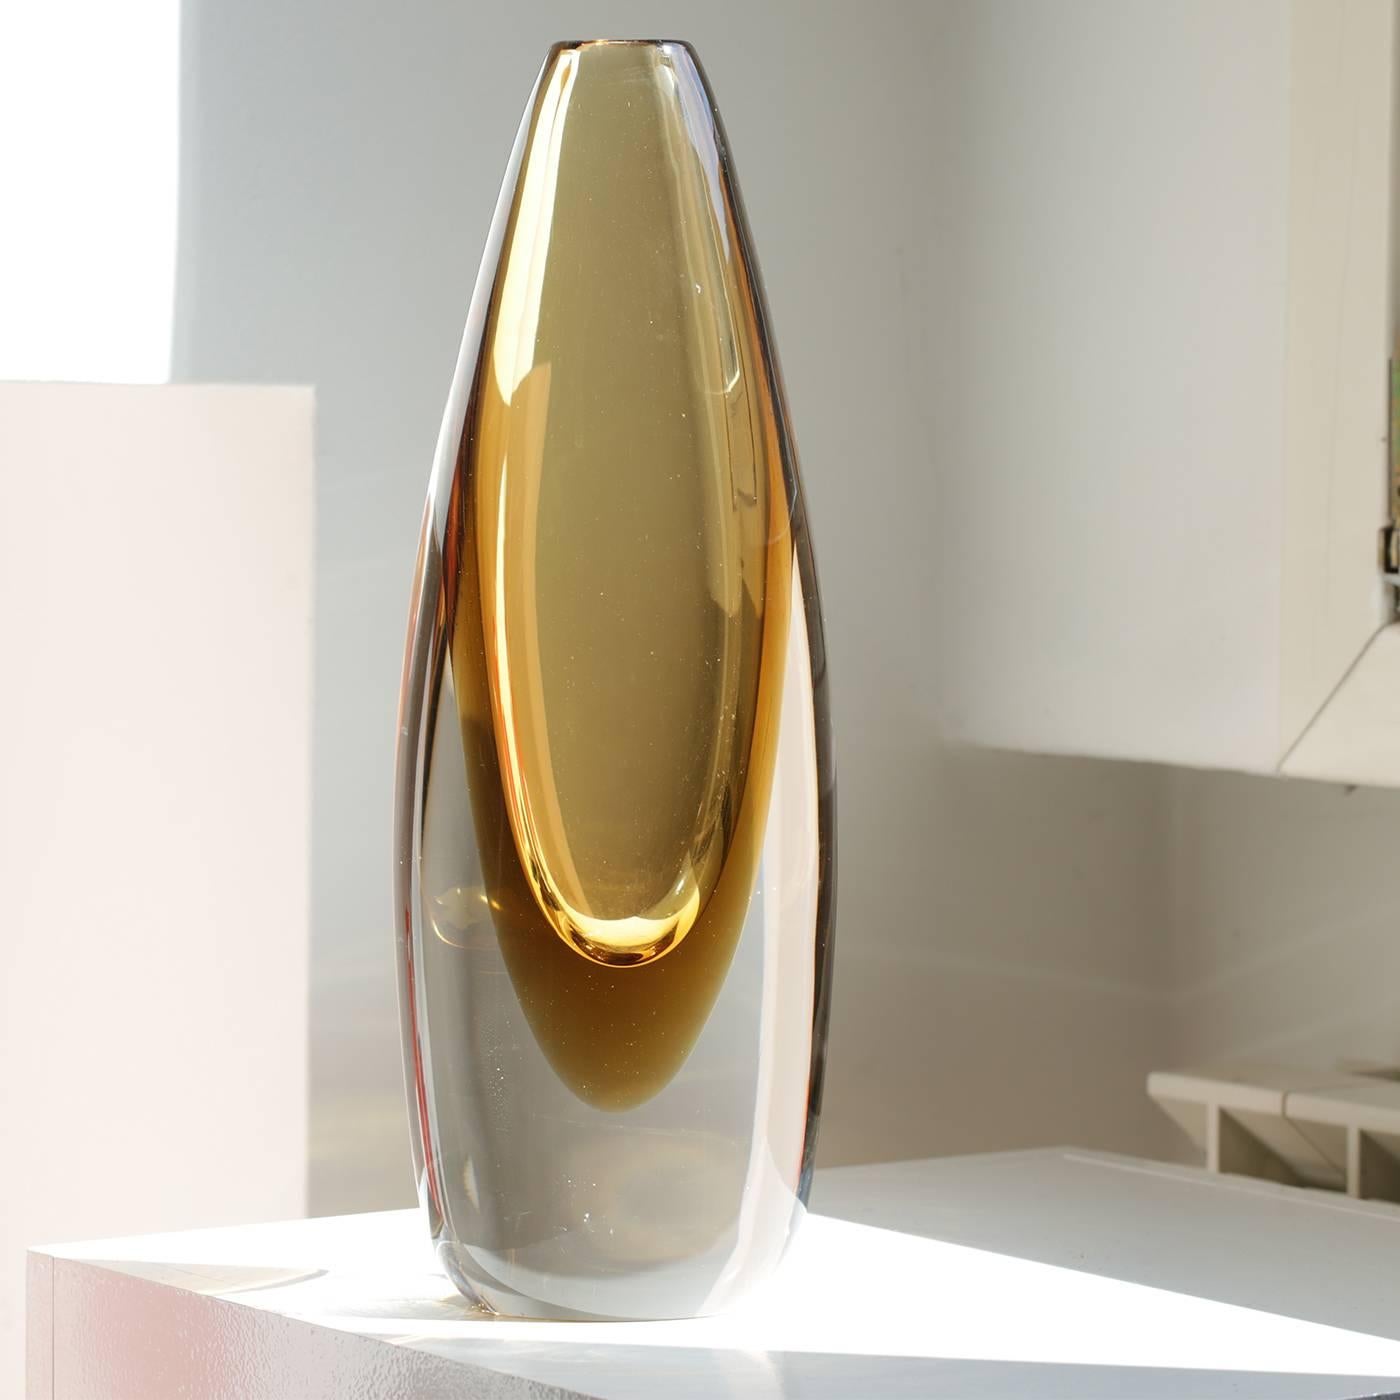 This striking mouth-blown vase features an elegant, elongated shape and is handcrafted in crystal and tobacco colors.

        